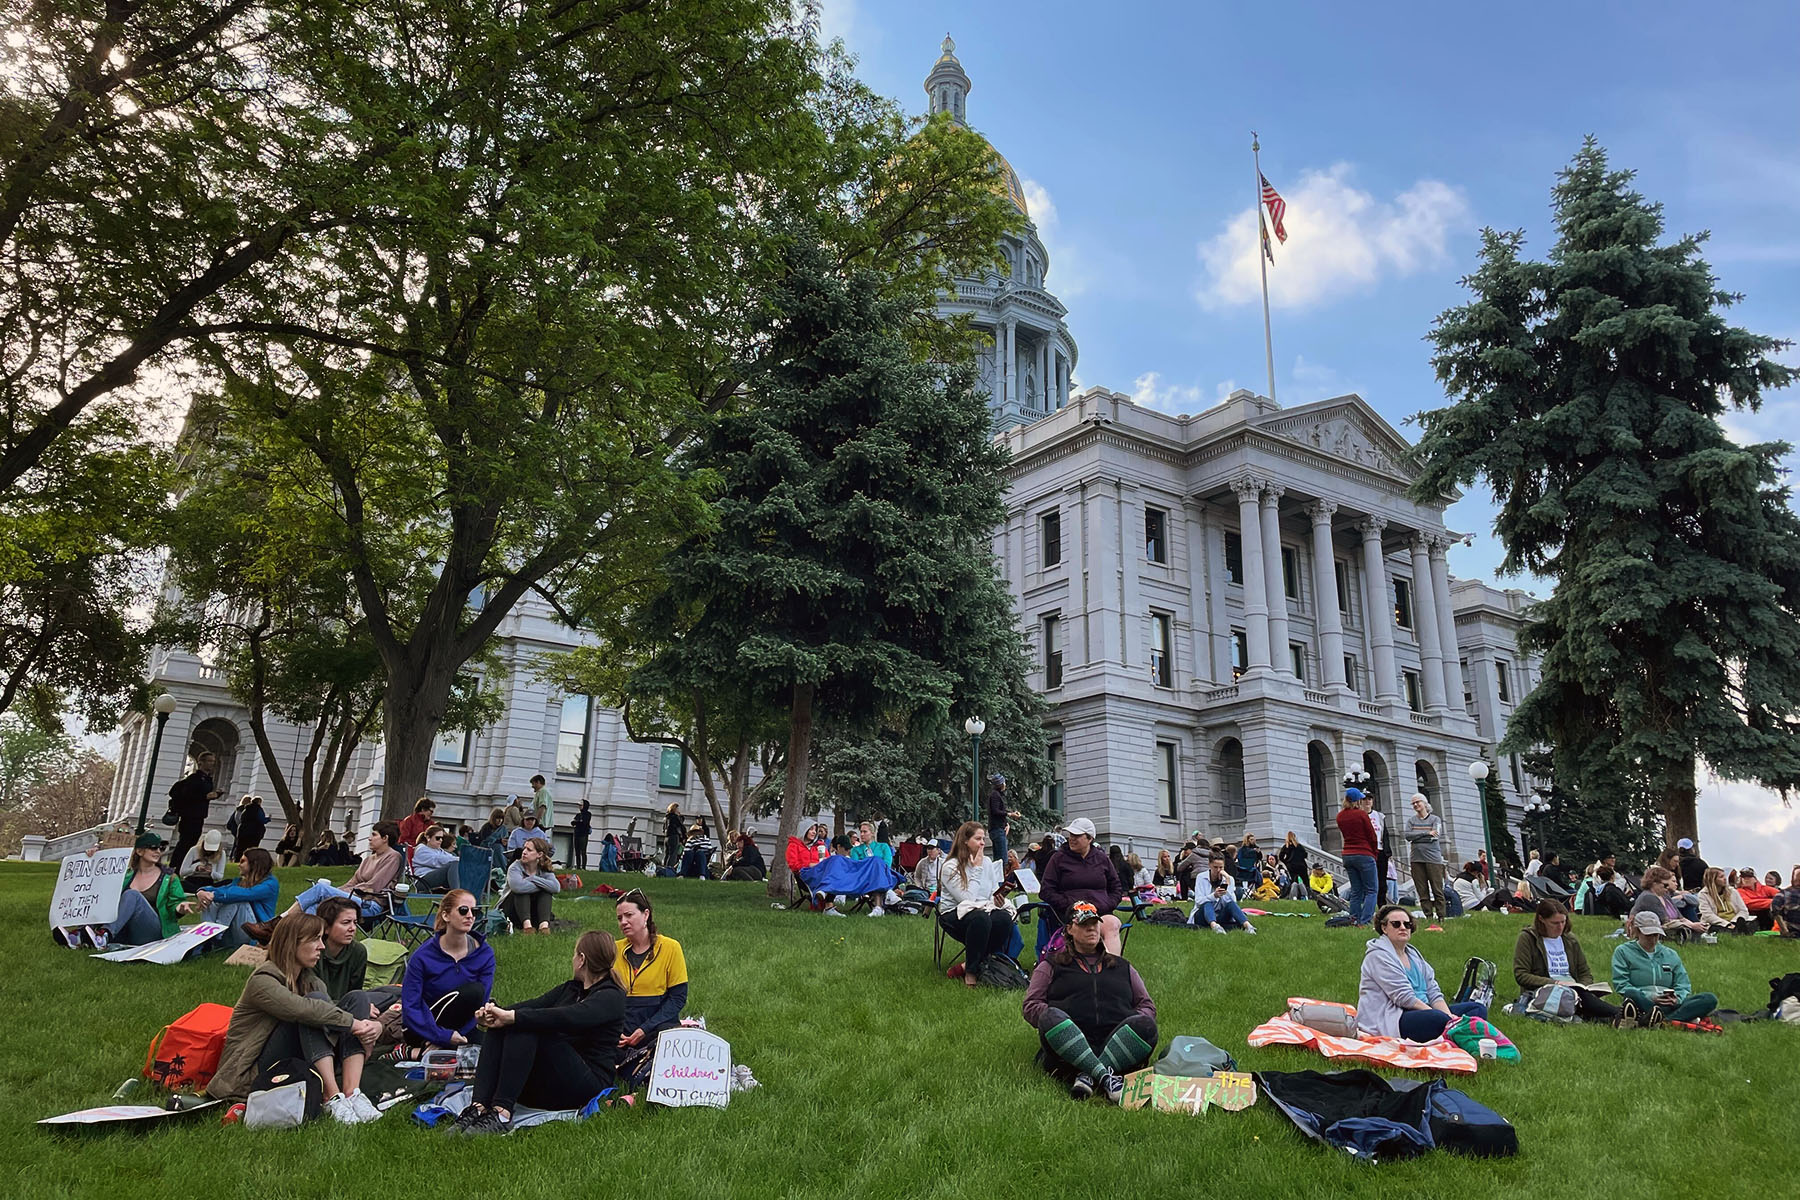 People participate in a sit-in at the Colorado State Capitol organized by Here 4 The Kids, a group founded by women of color that opposes gun violence and white supremacy,